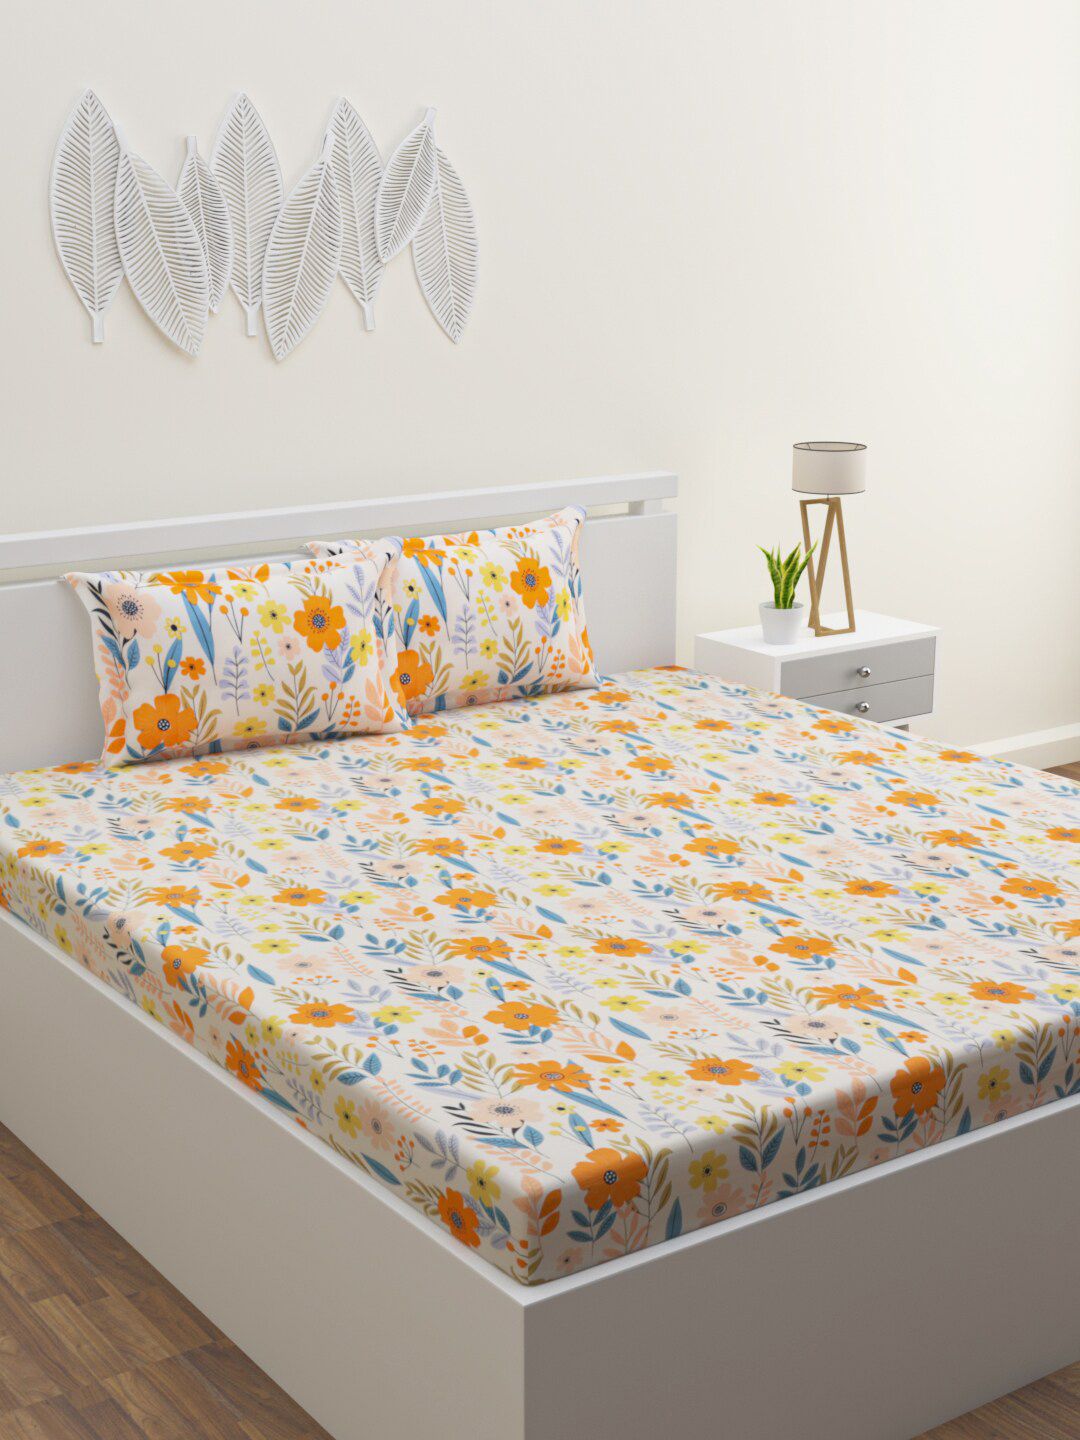 ROMEE Peach-Coloured & Orange Floral 300 TC Pure Cotton King Bedsheet with 2 Pillow Covers Price in India